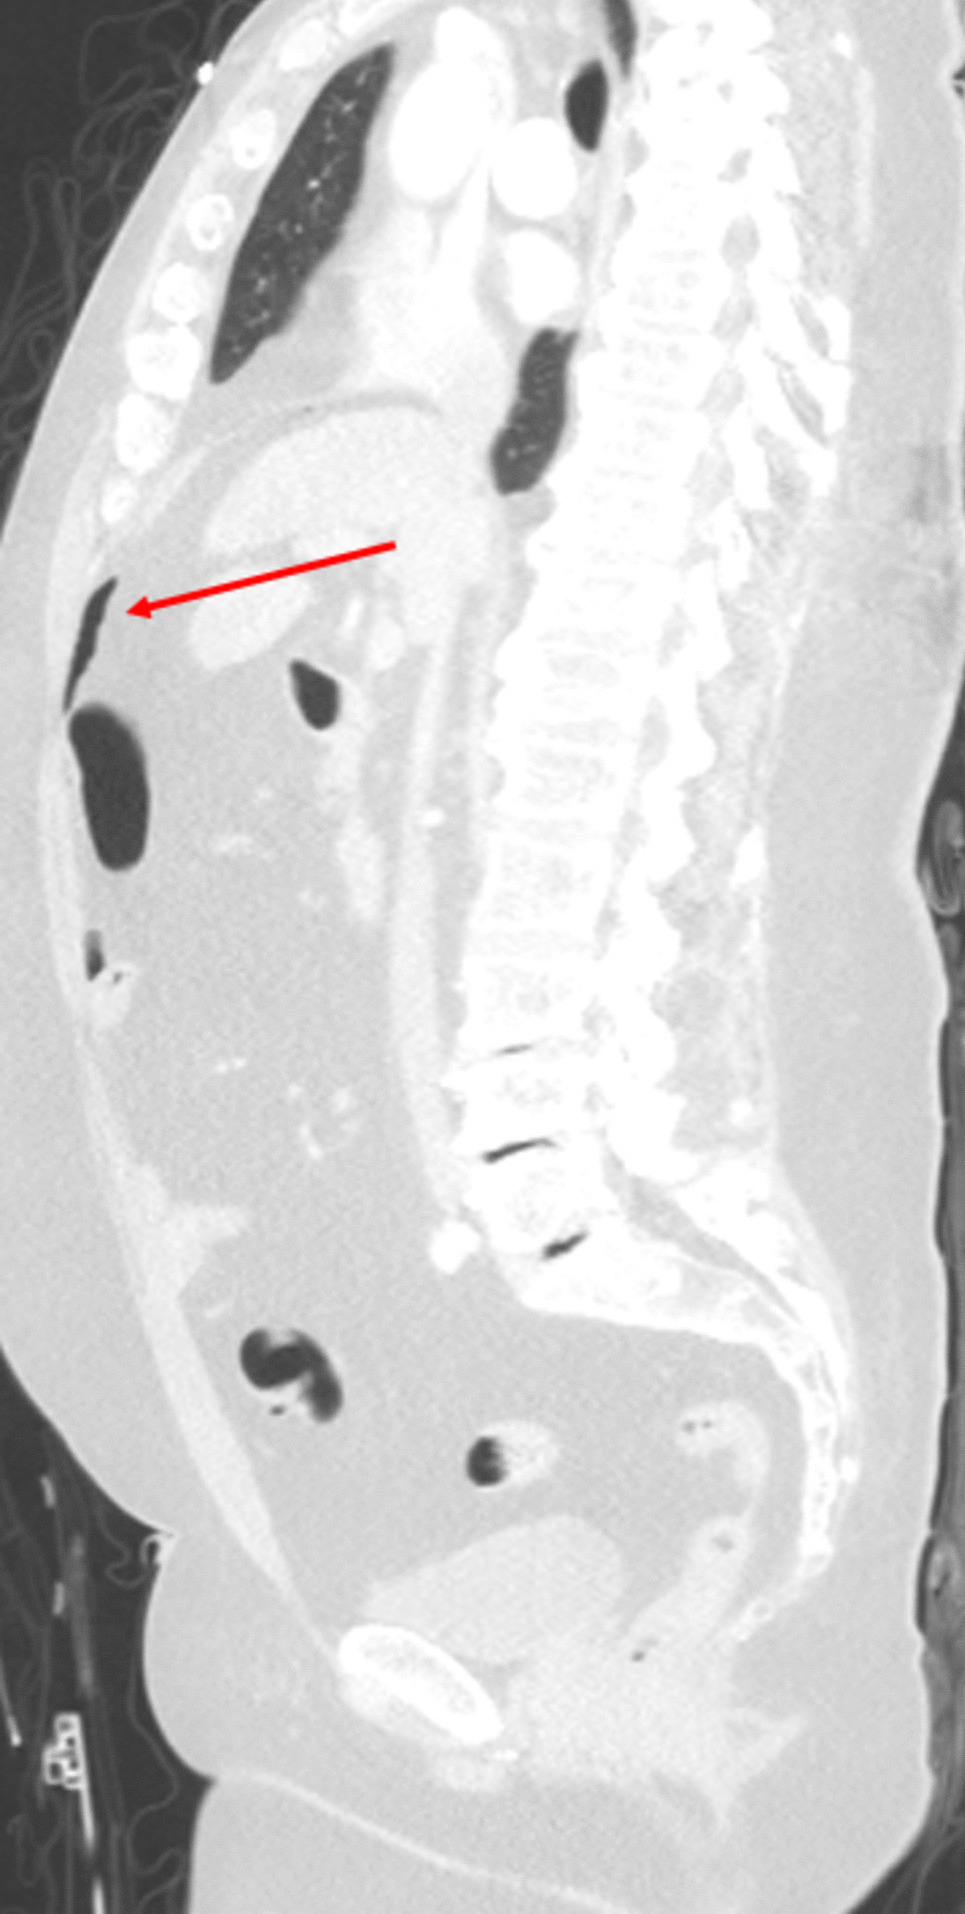 Abdominal computed tomography scoring systems and experienced radiologists in the radiological diagnosis of small bowel and mesenteric injury